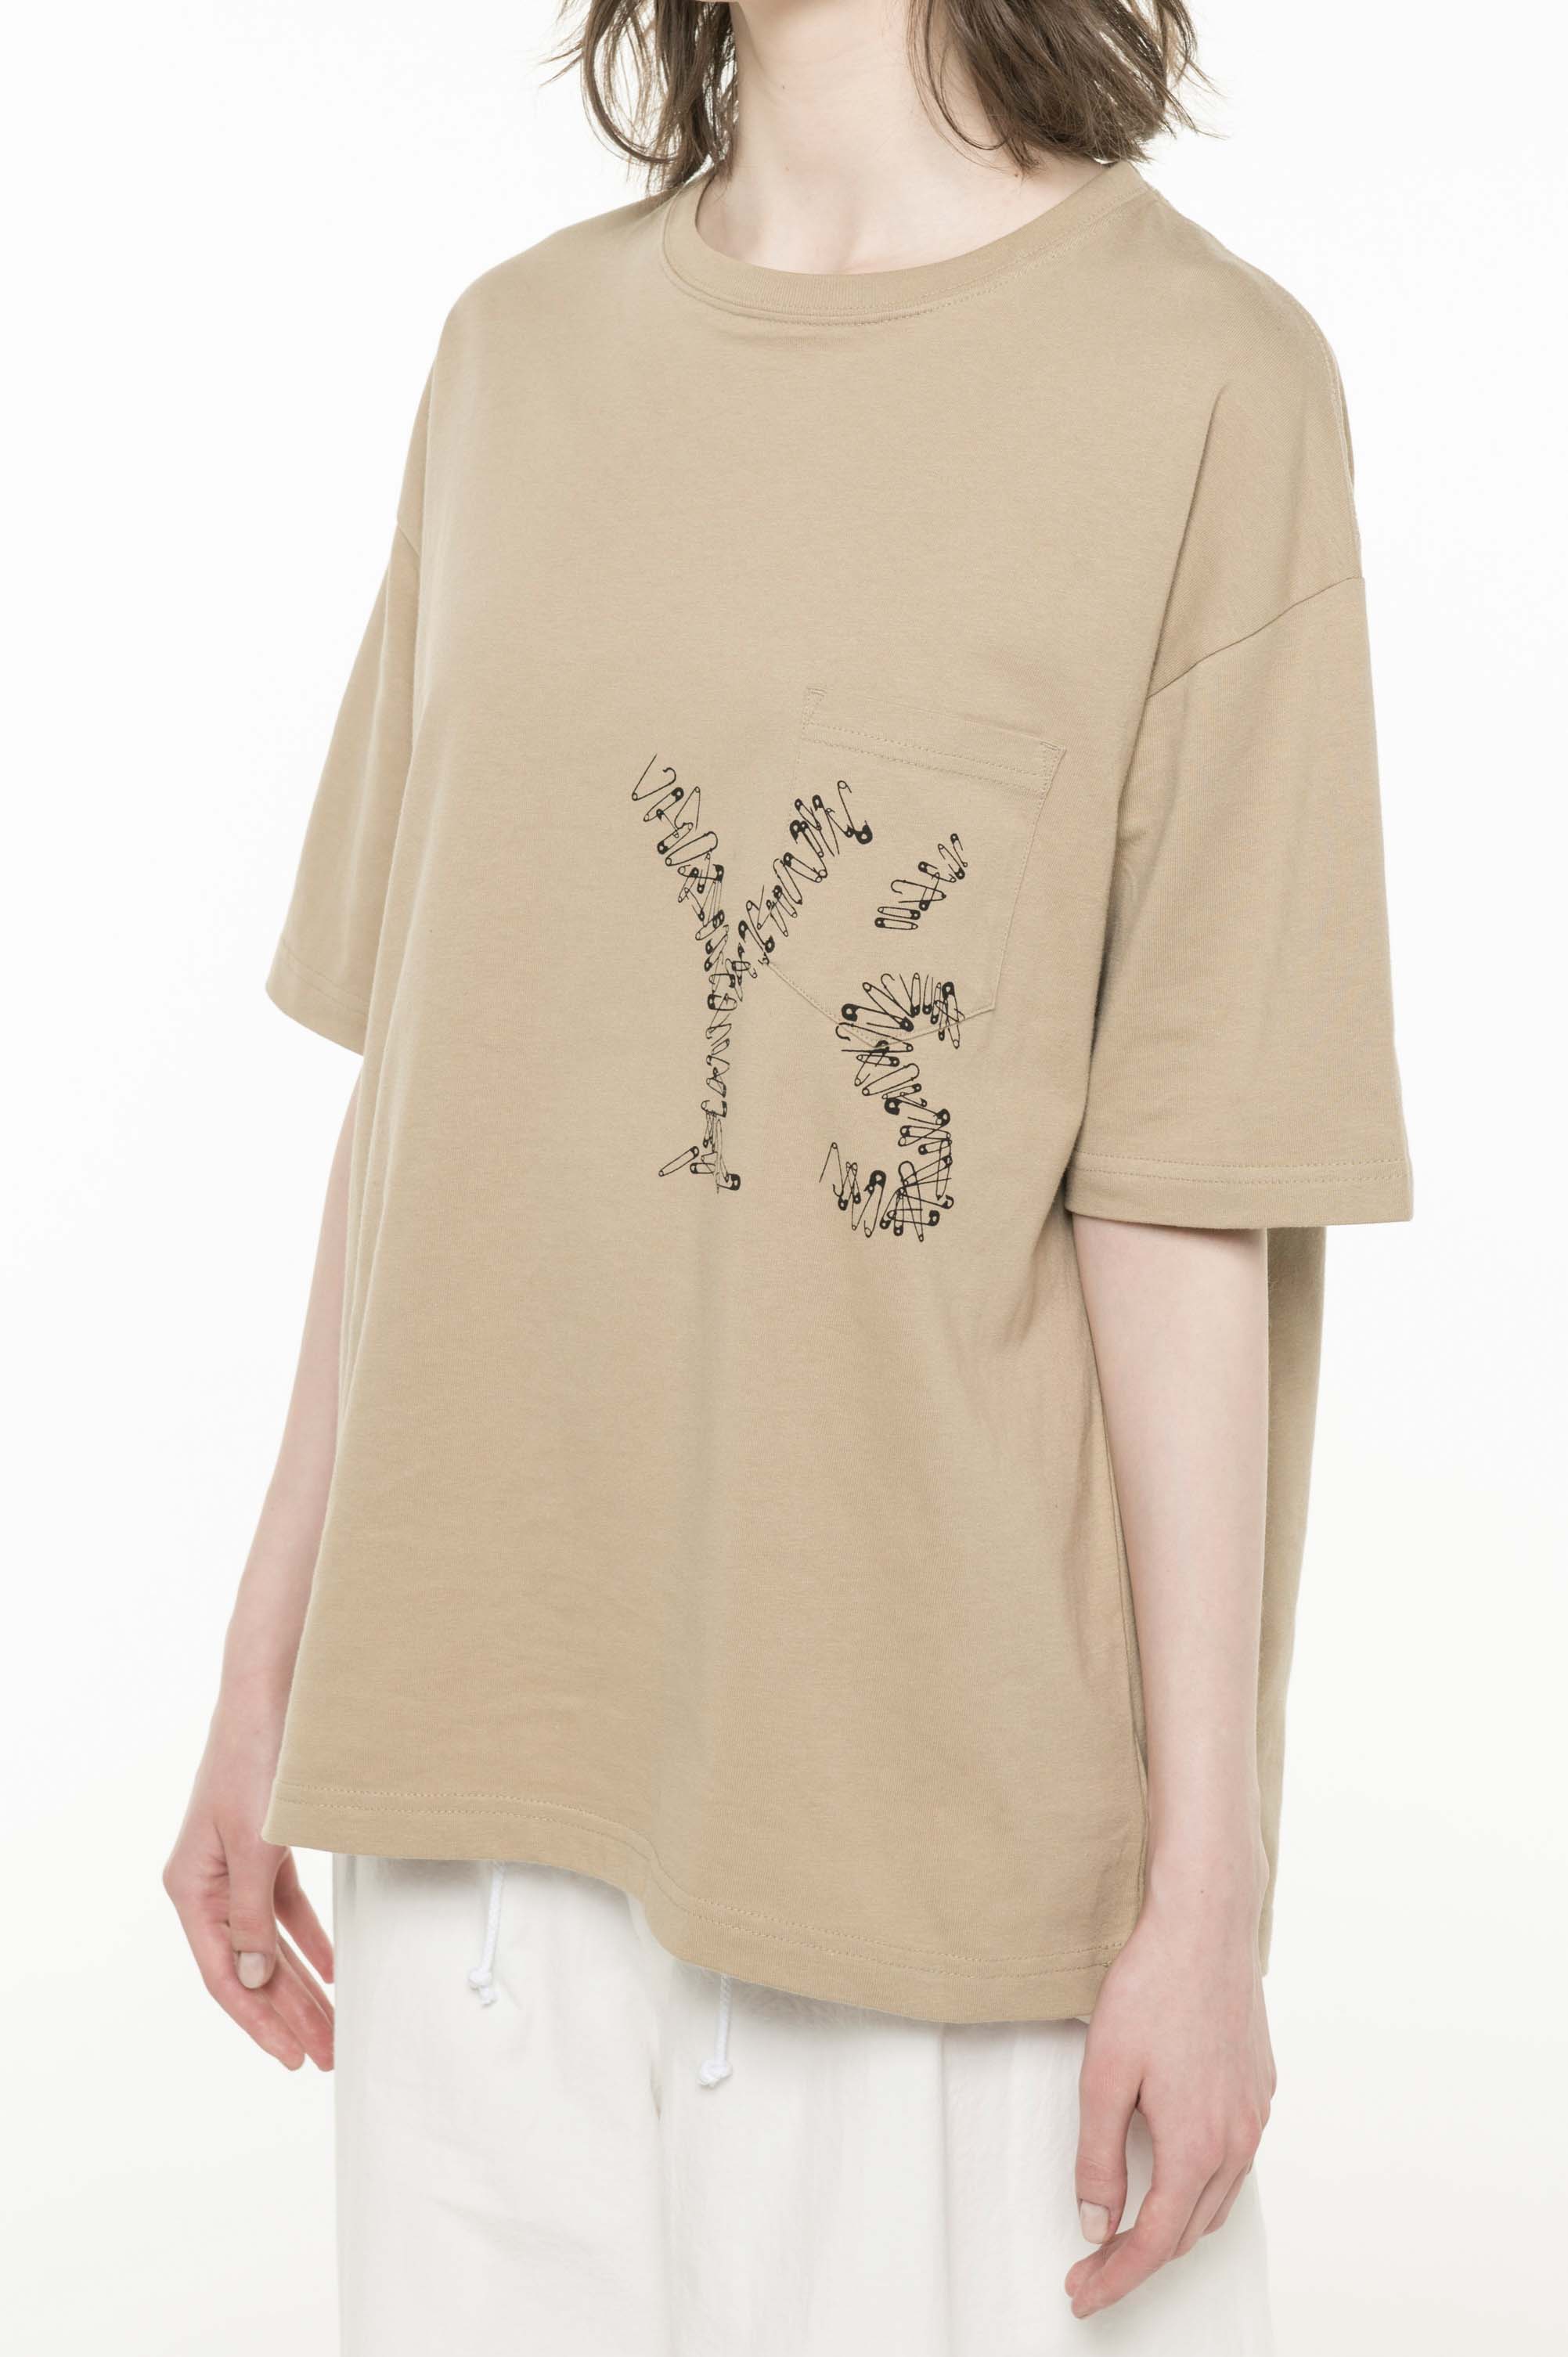 -Online EXCLUSIVE- Y's Pin T-shirt